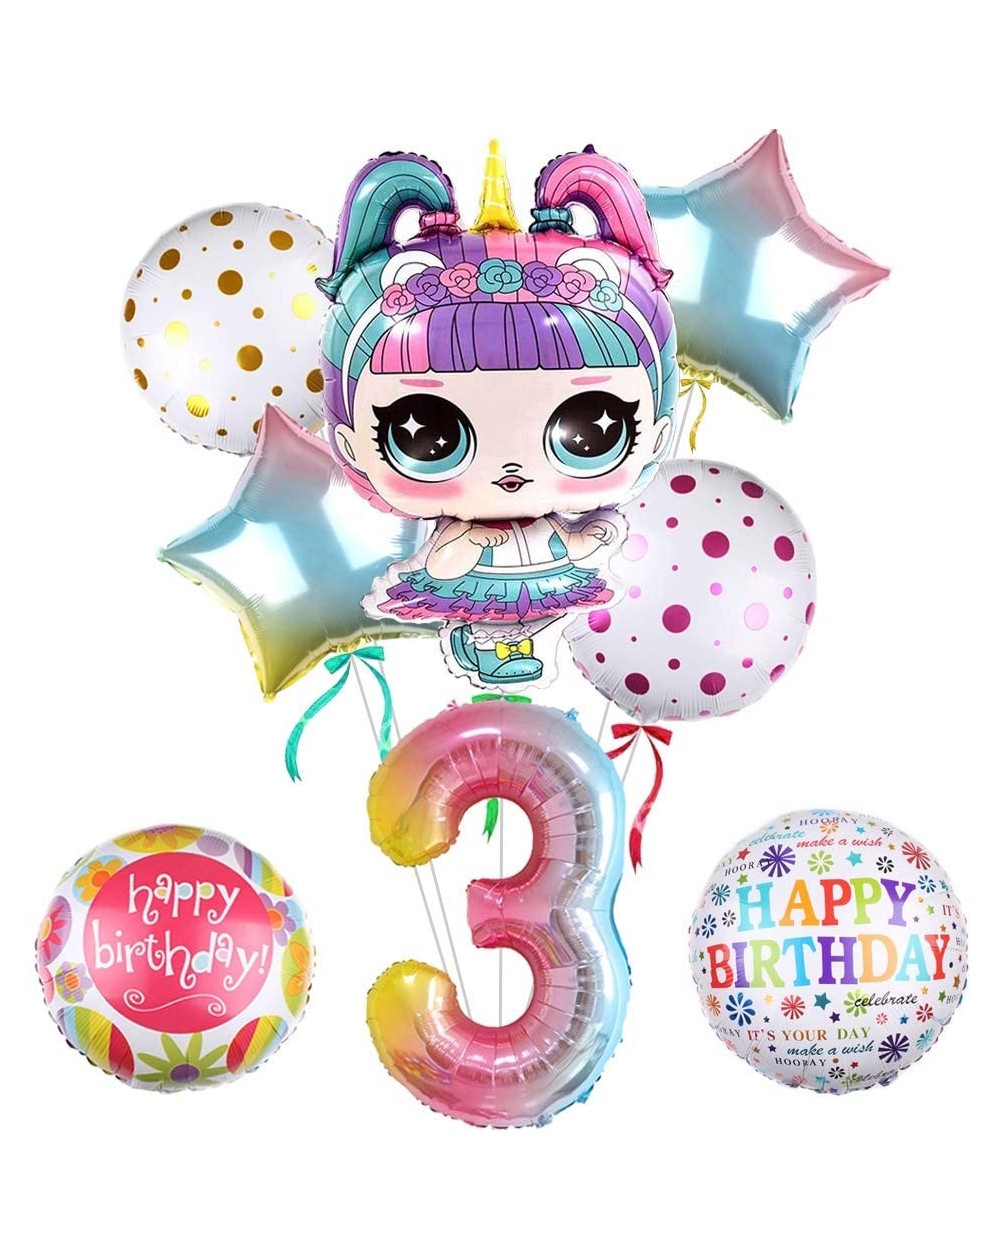 Balloons 8pcs LOL Balloons Party Supplies- 32"Doll Balloons Mylar Balloon for 1st Birthday Balloon Bouquet Decorations- Baby ...